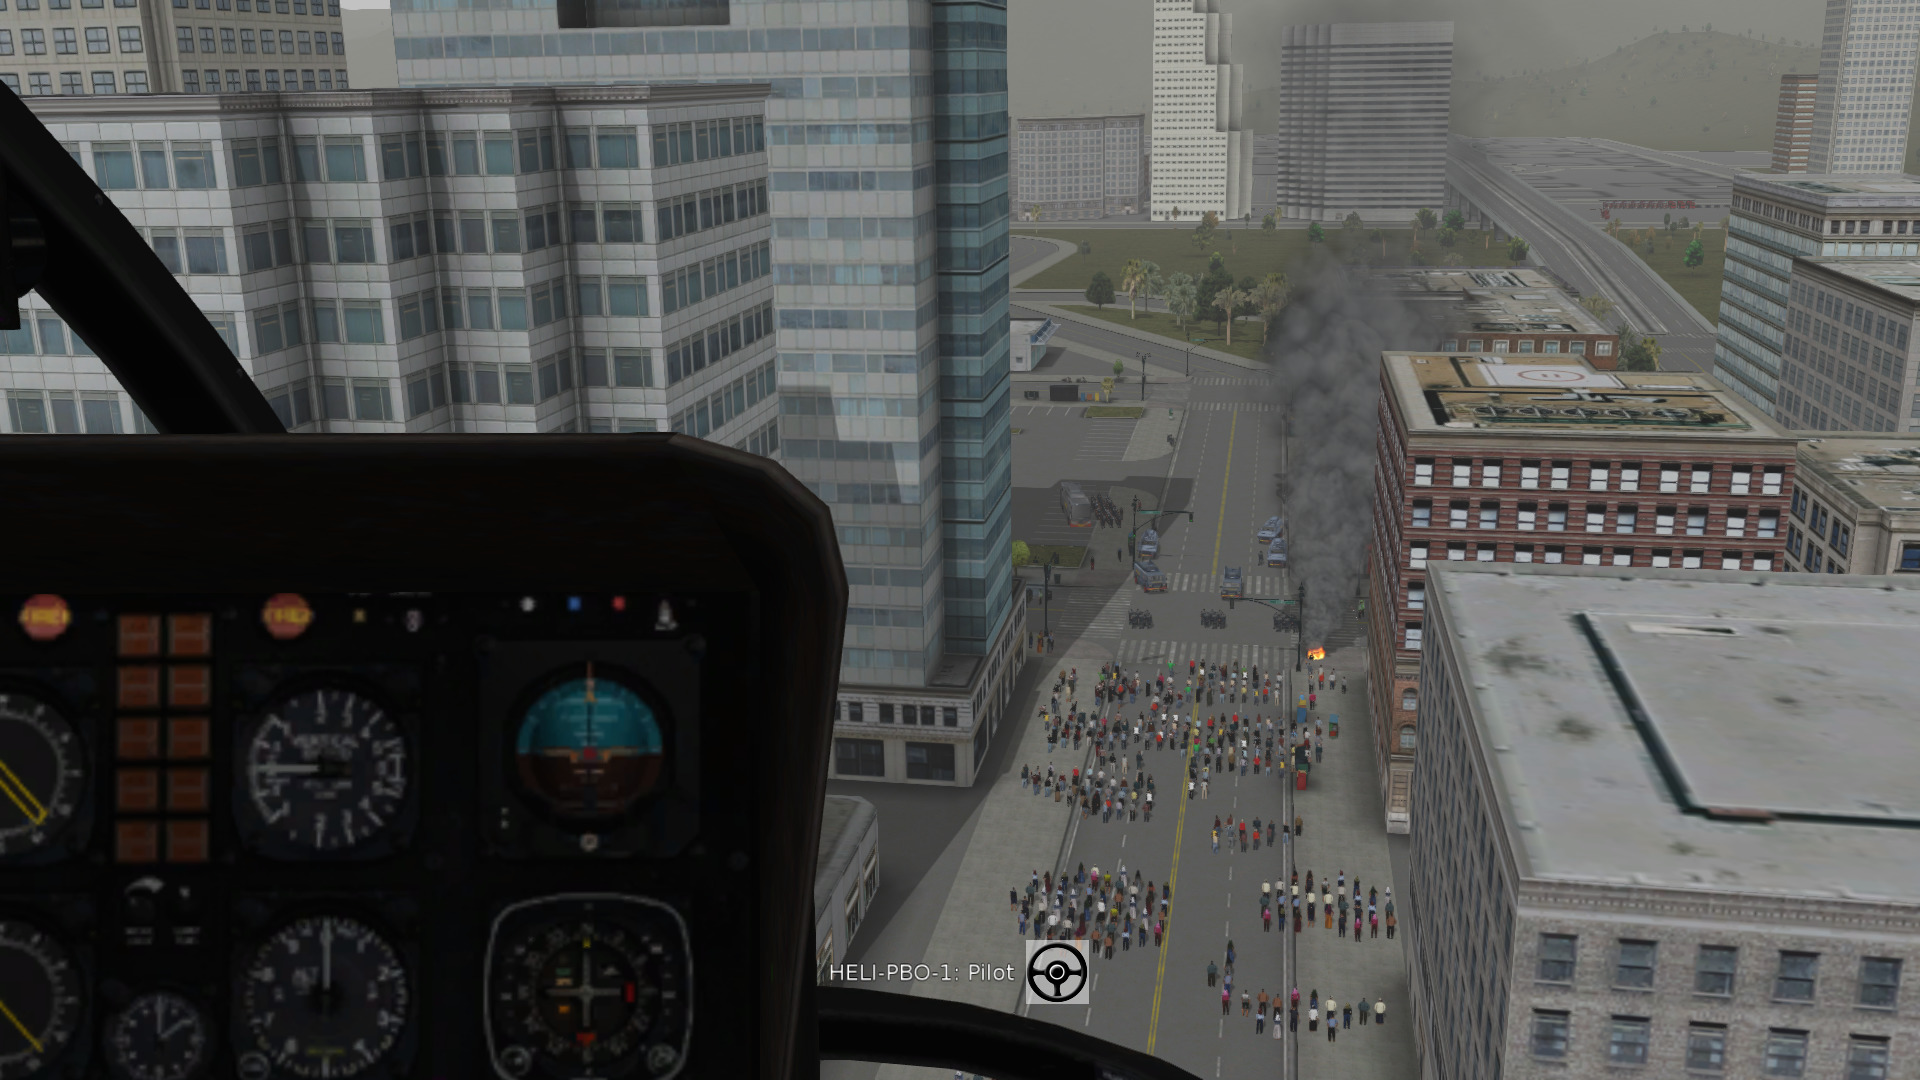 Live helicopter view of a riot moving towards the city center, providing information to the command post in simulation.